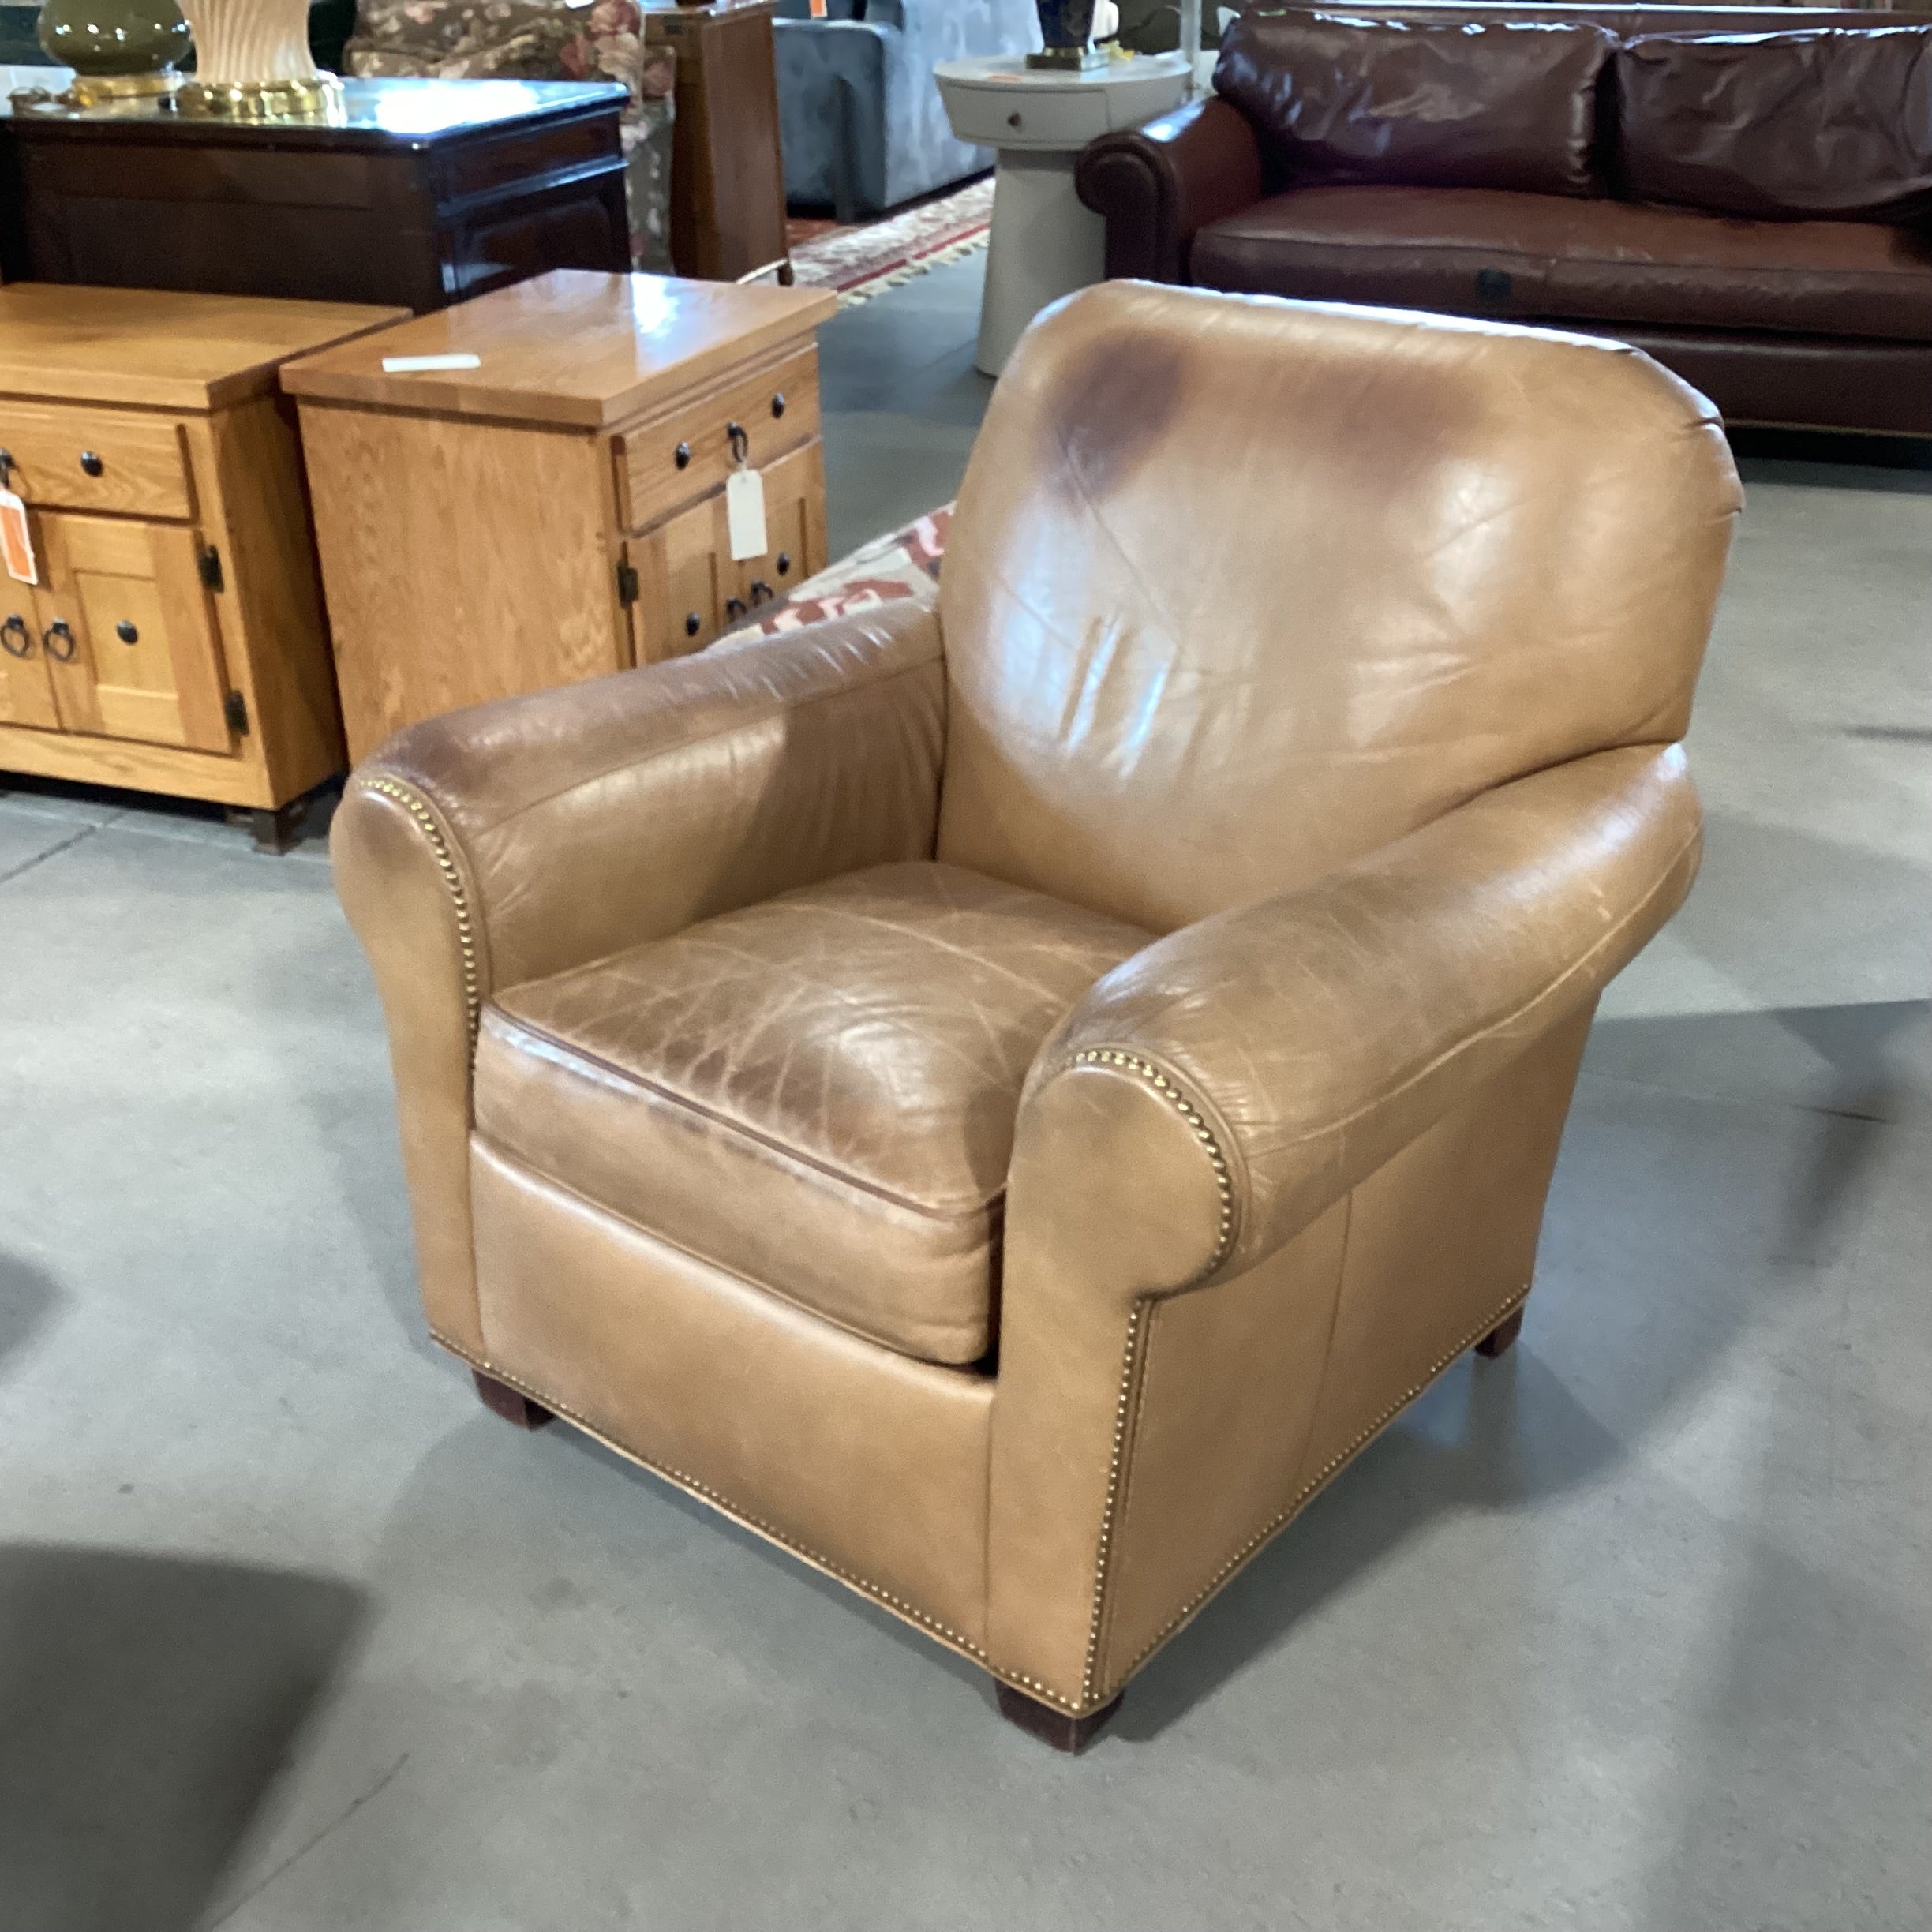 Hancook & Moore Leather Chair 33.5"x 35"x 36"